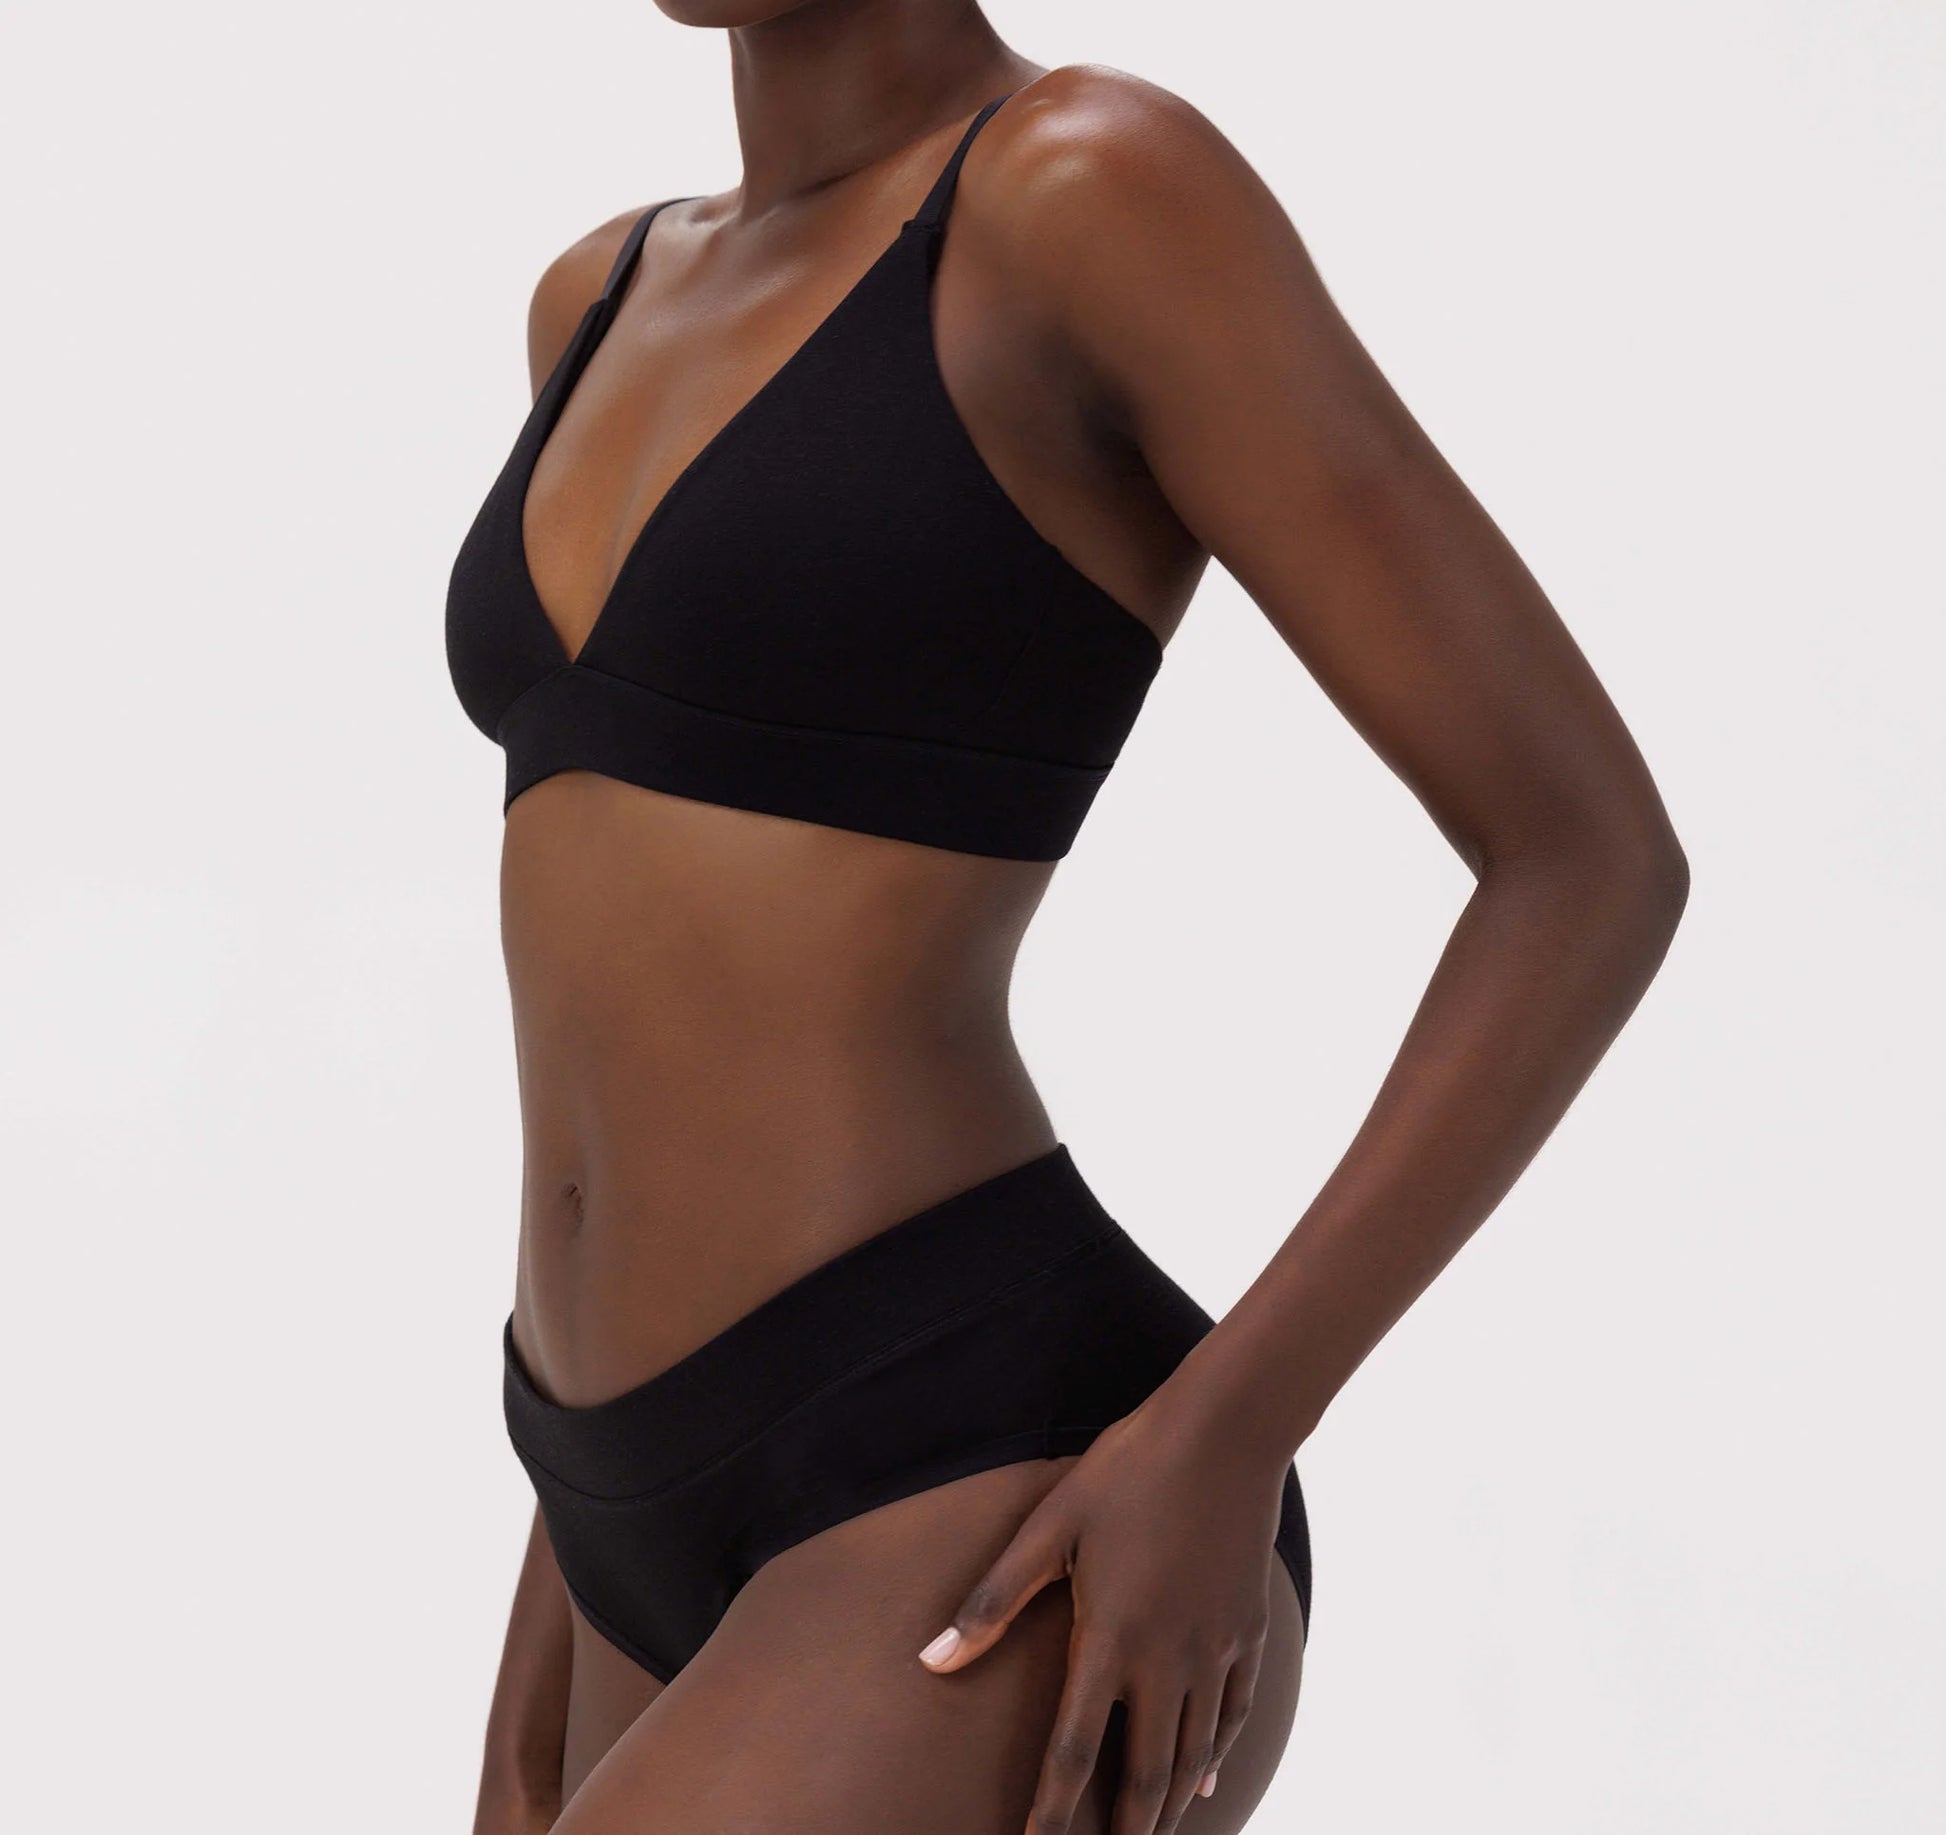 The model is wearing a black Core Triangle Bra by Organic Basics.